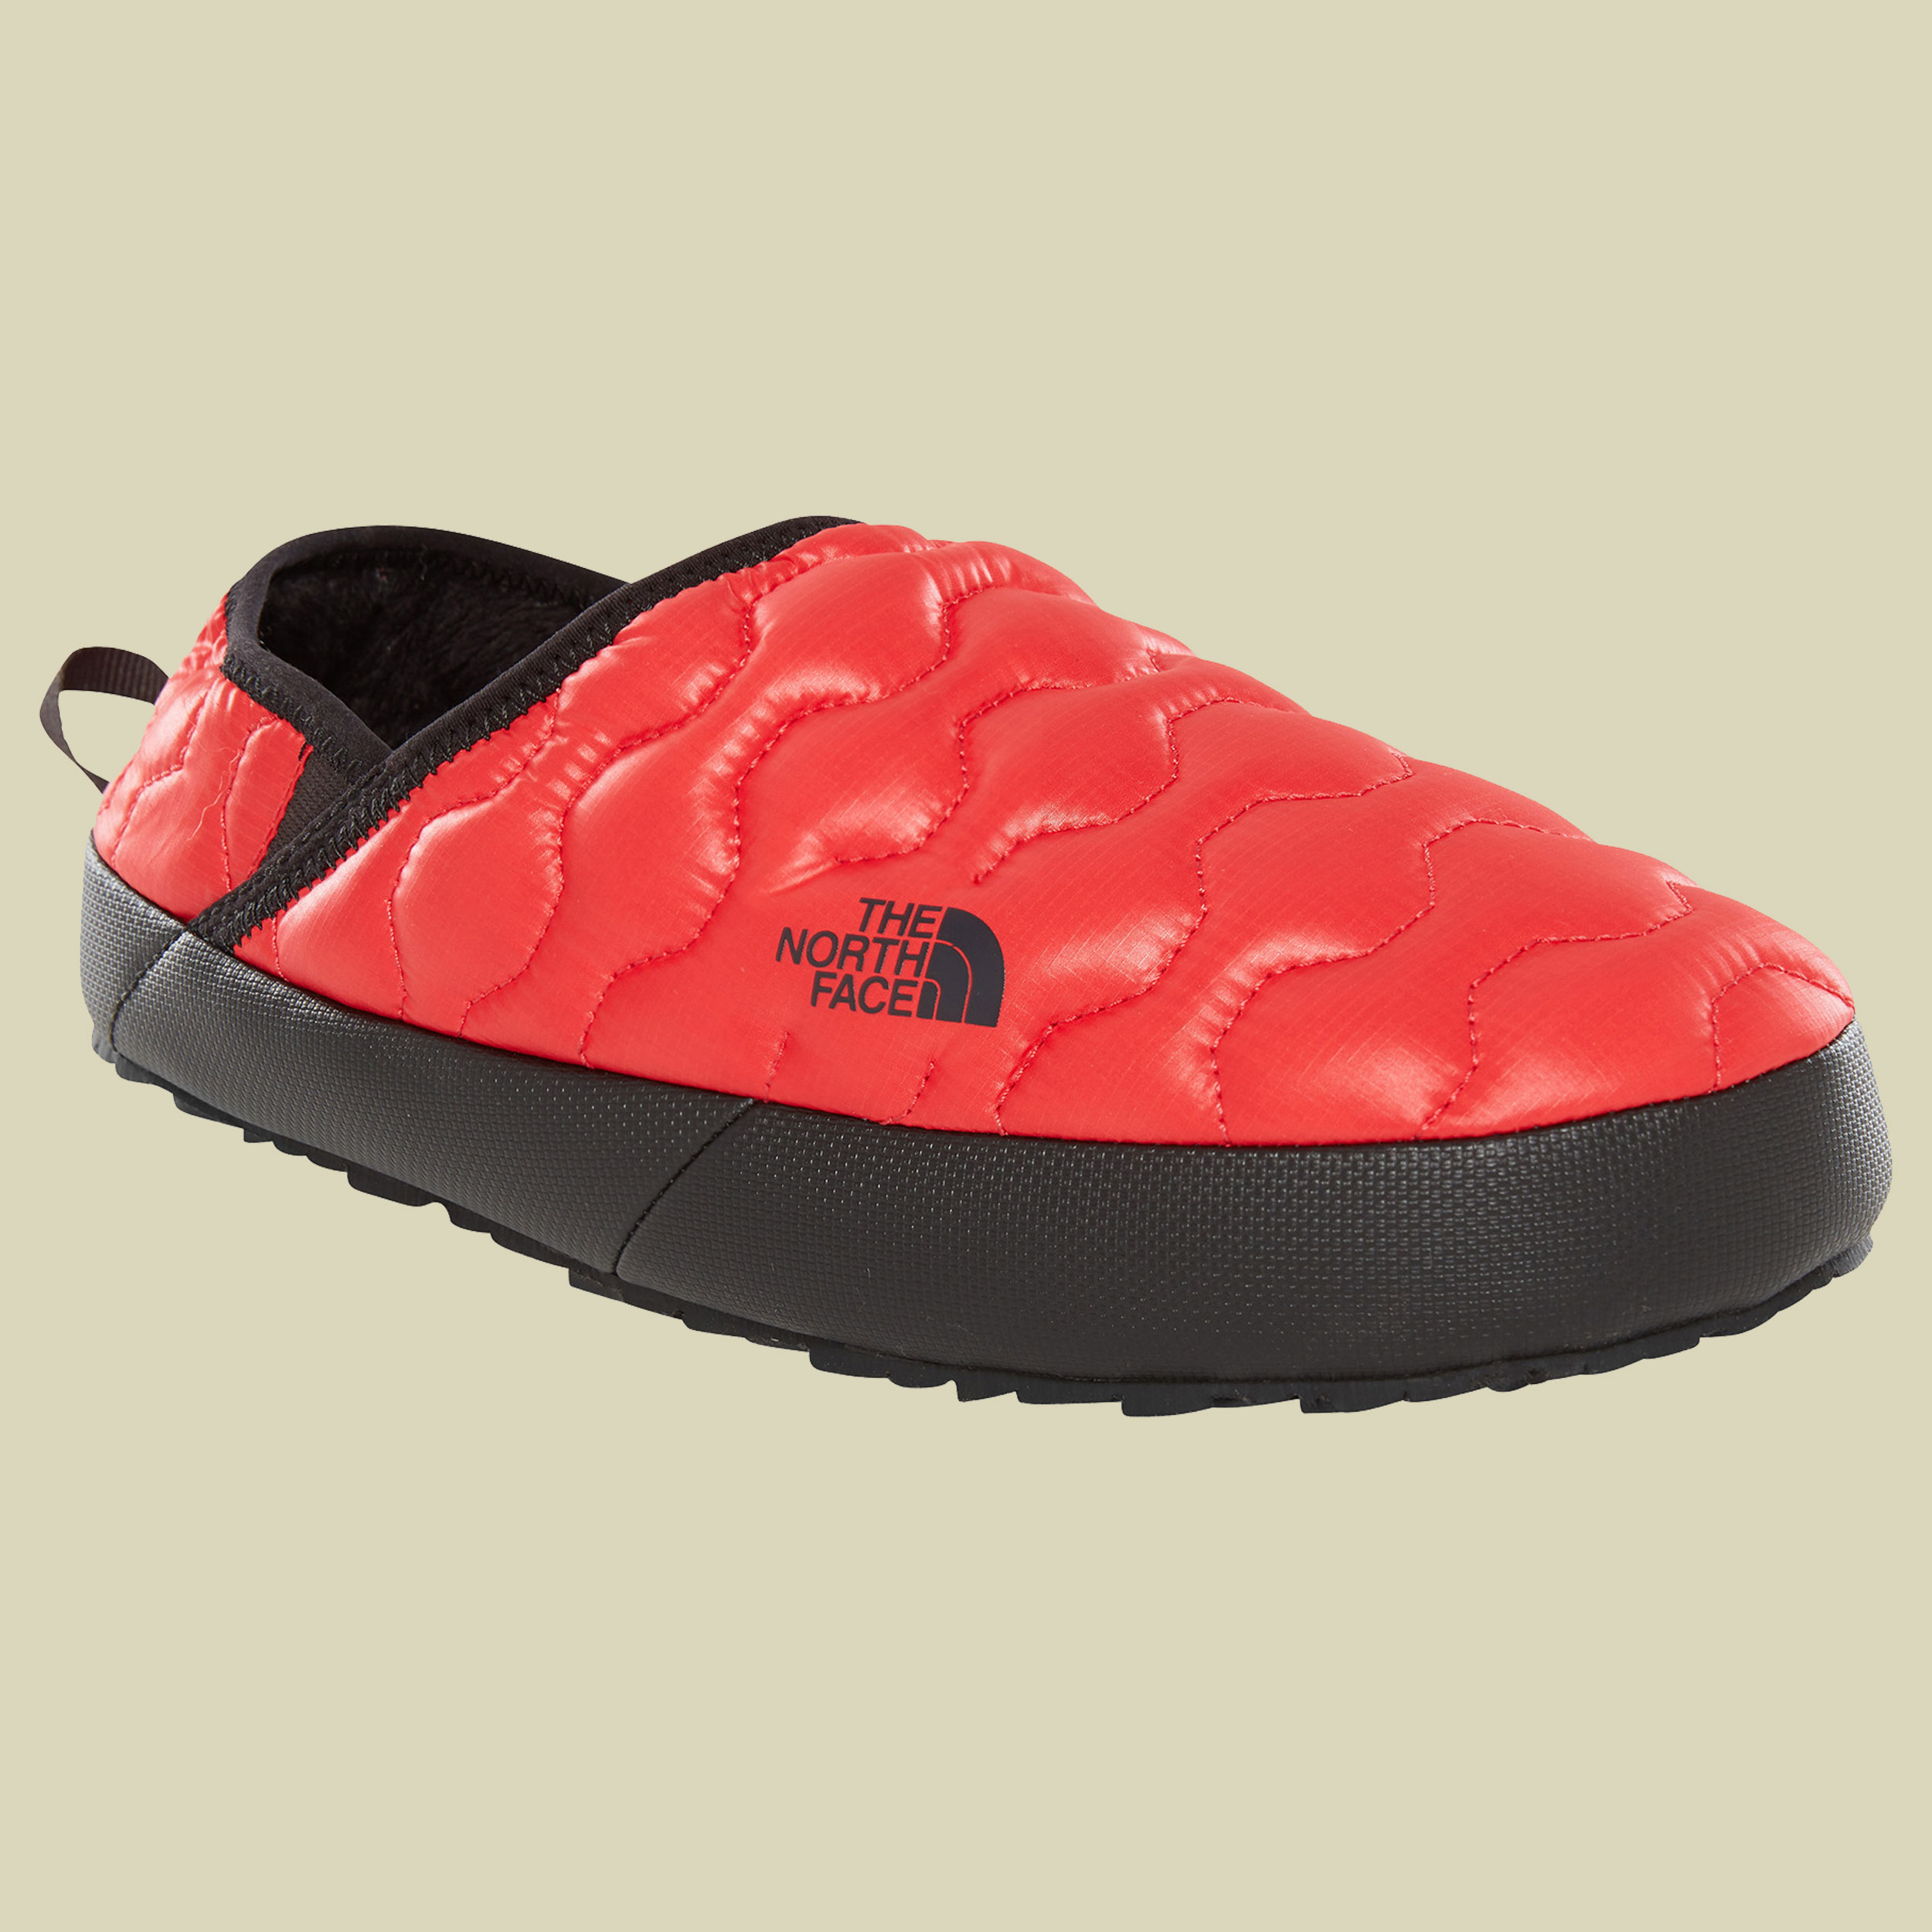 ThermoBall Traction Mule IV Men Größe UK 12 Farbe shiny red-black